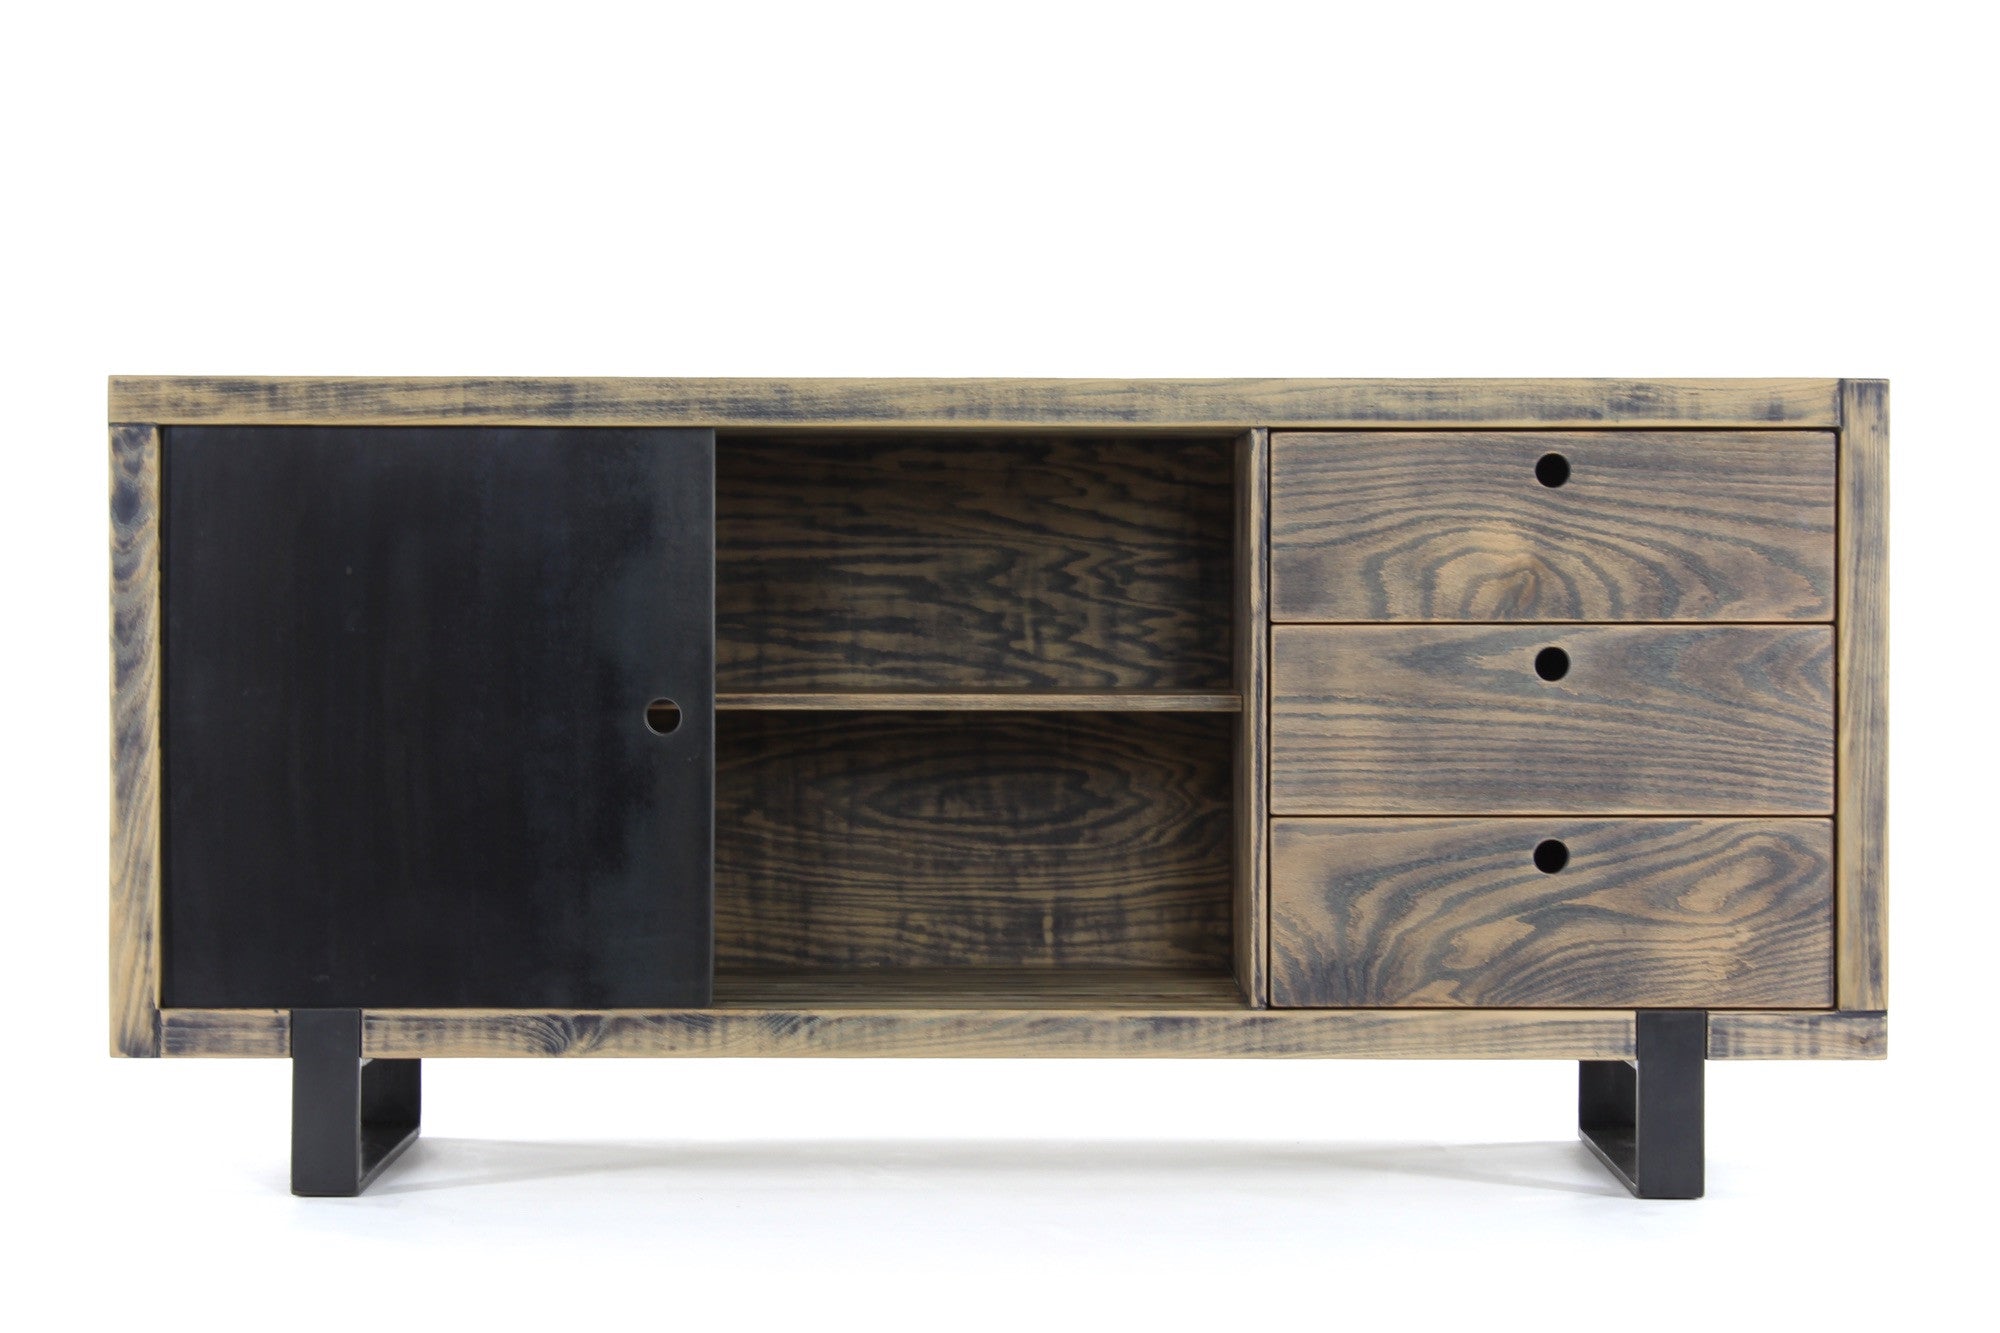 the cupboard | aged wood finish with waxed steel